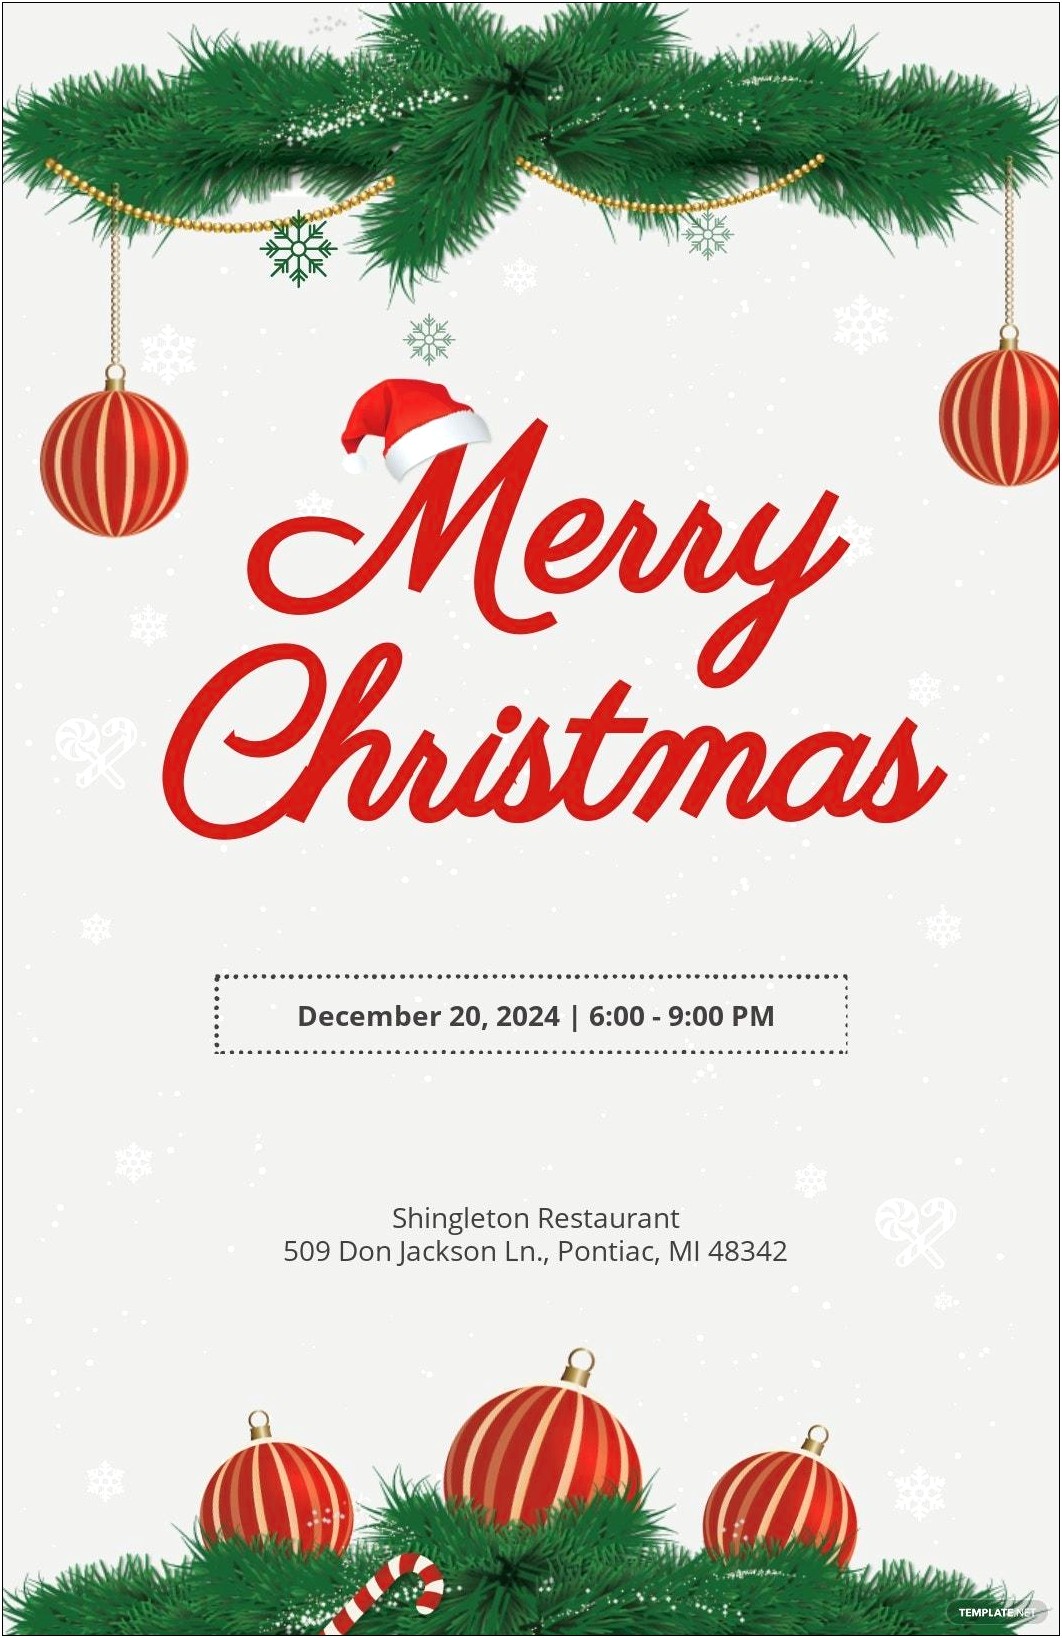 Christmas Holiday Hours Sign Template Free